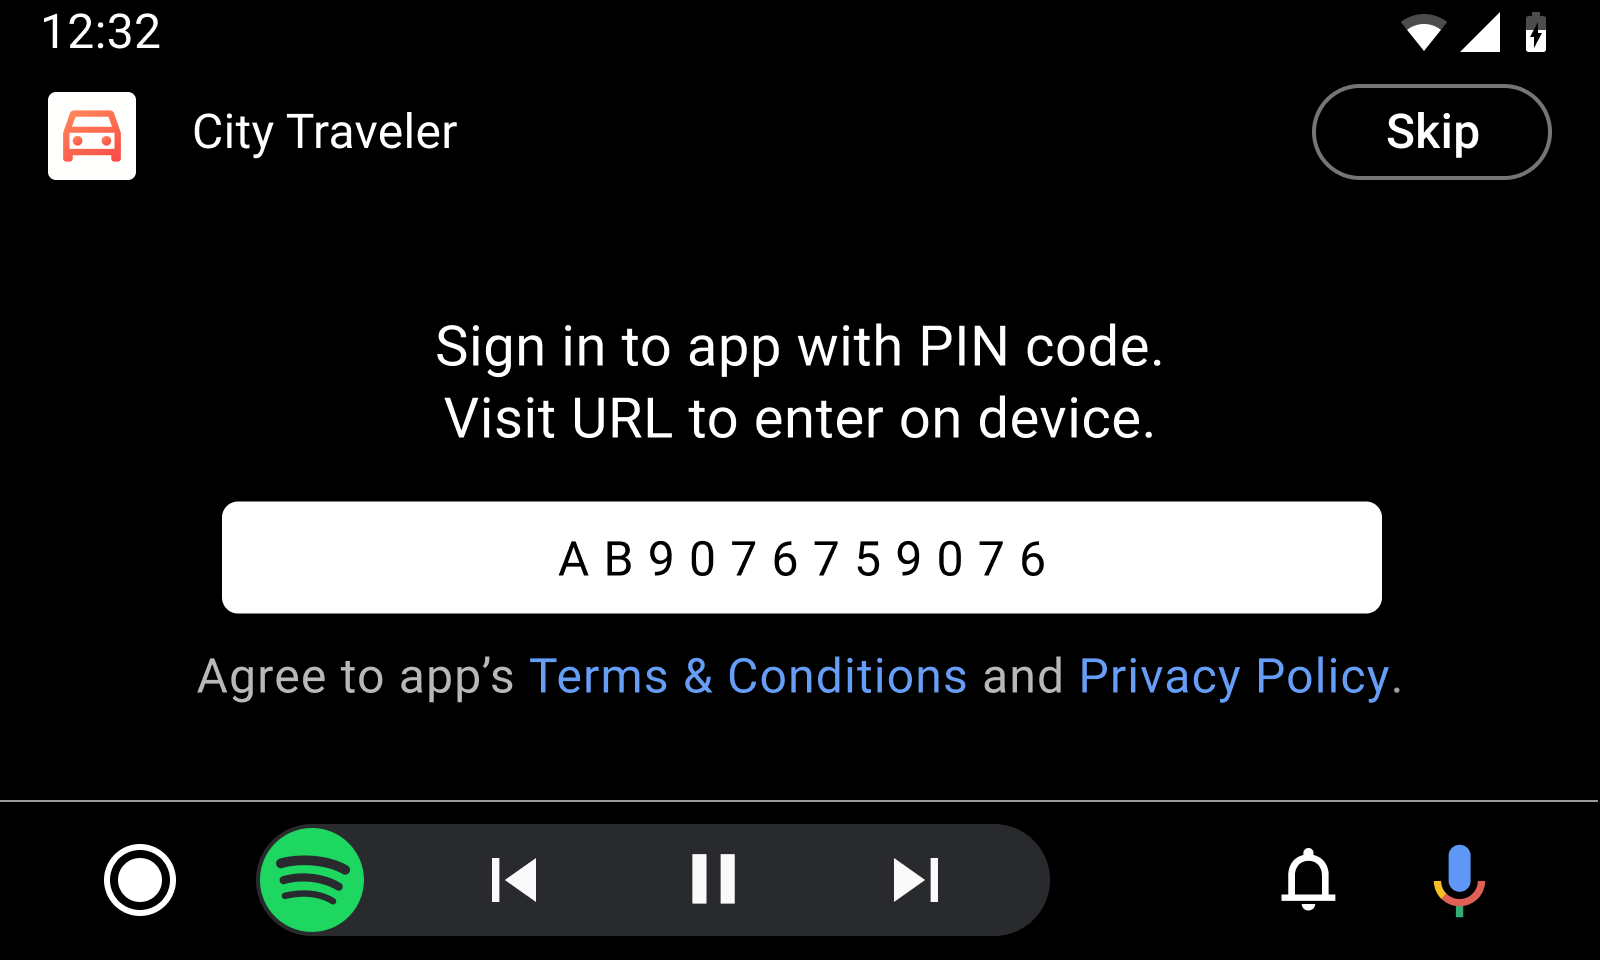 Sign-in with PIN